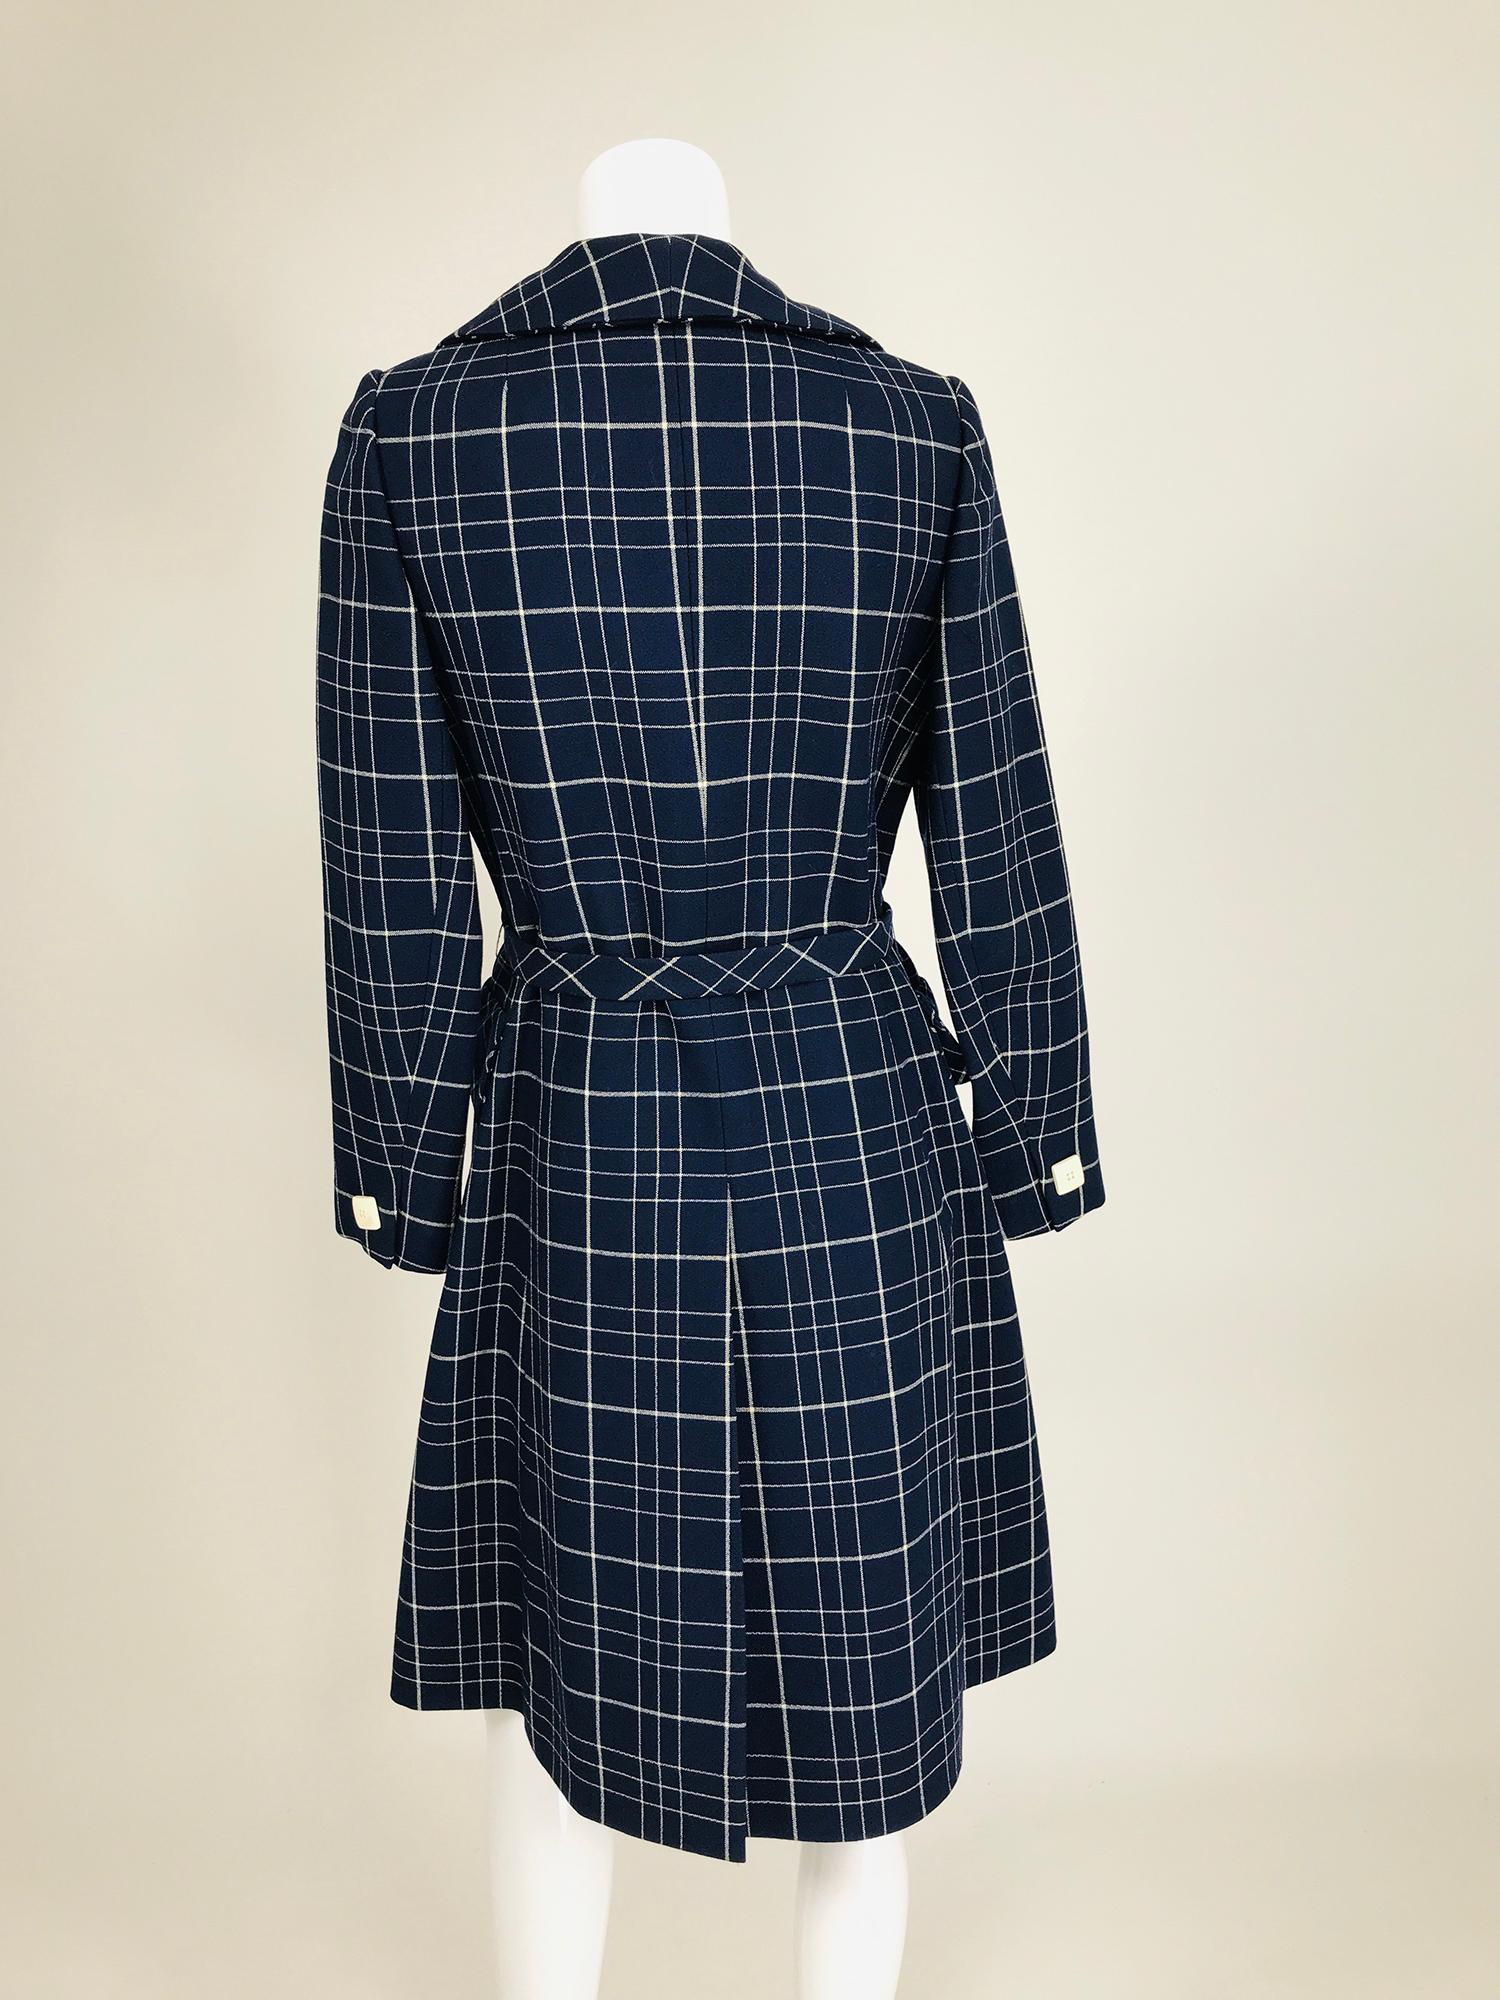 Adele Simpson 1960s Navy & White Wool Plaid  Wrap Coat In Good Condition For Sale In West Palm Beach, FL